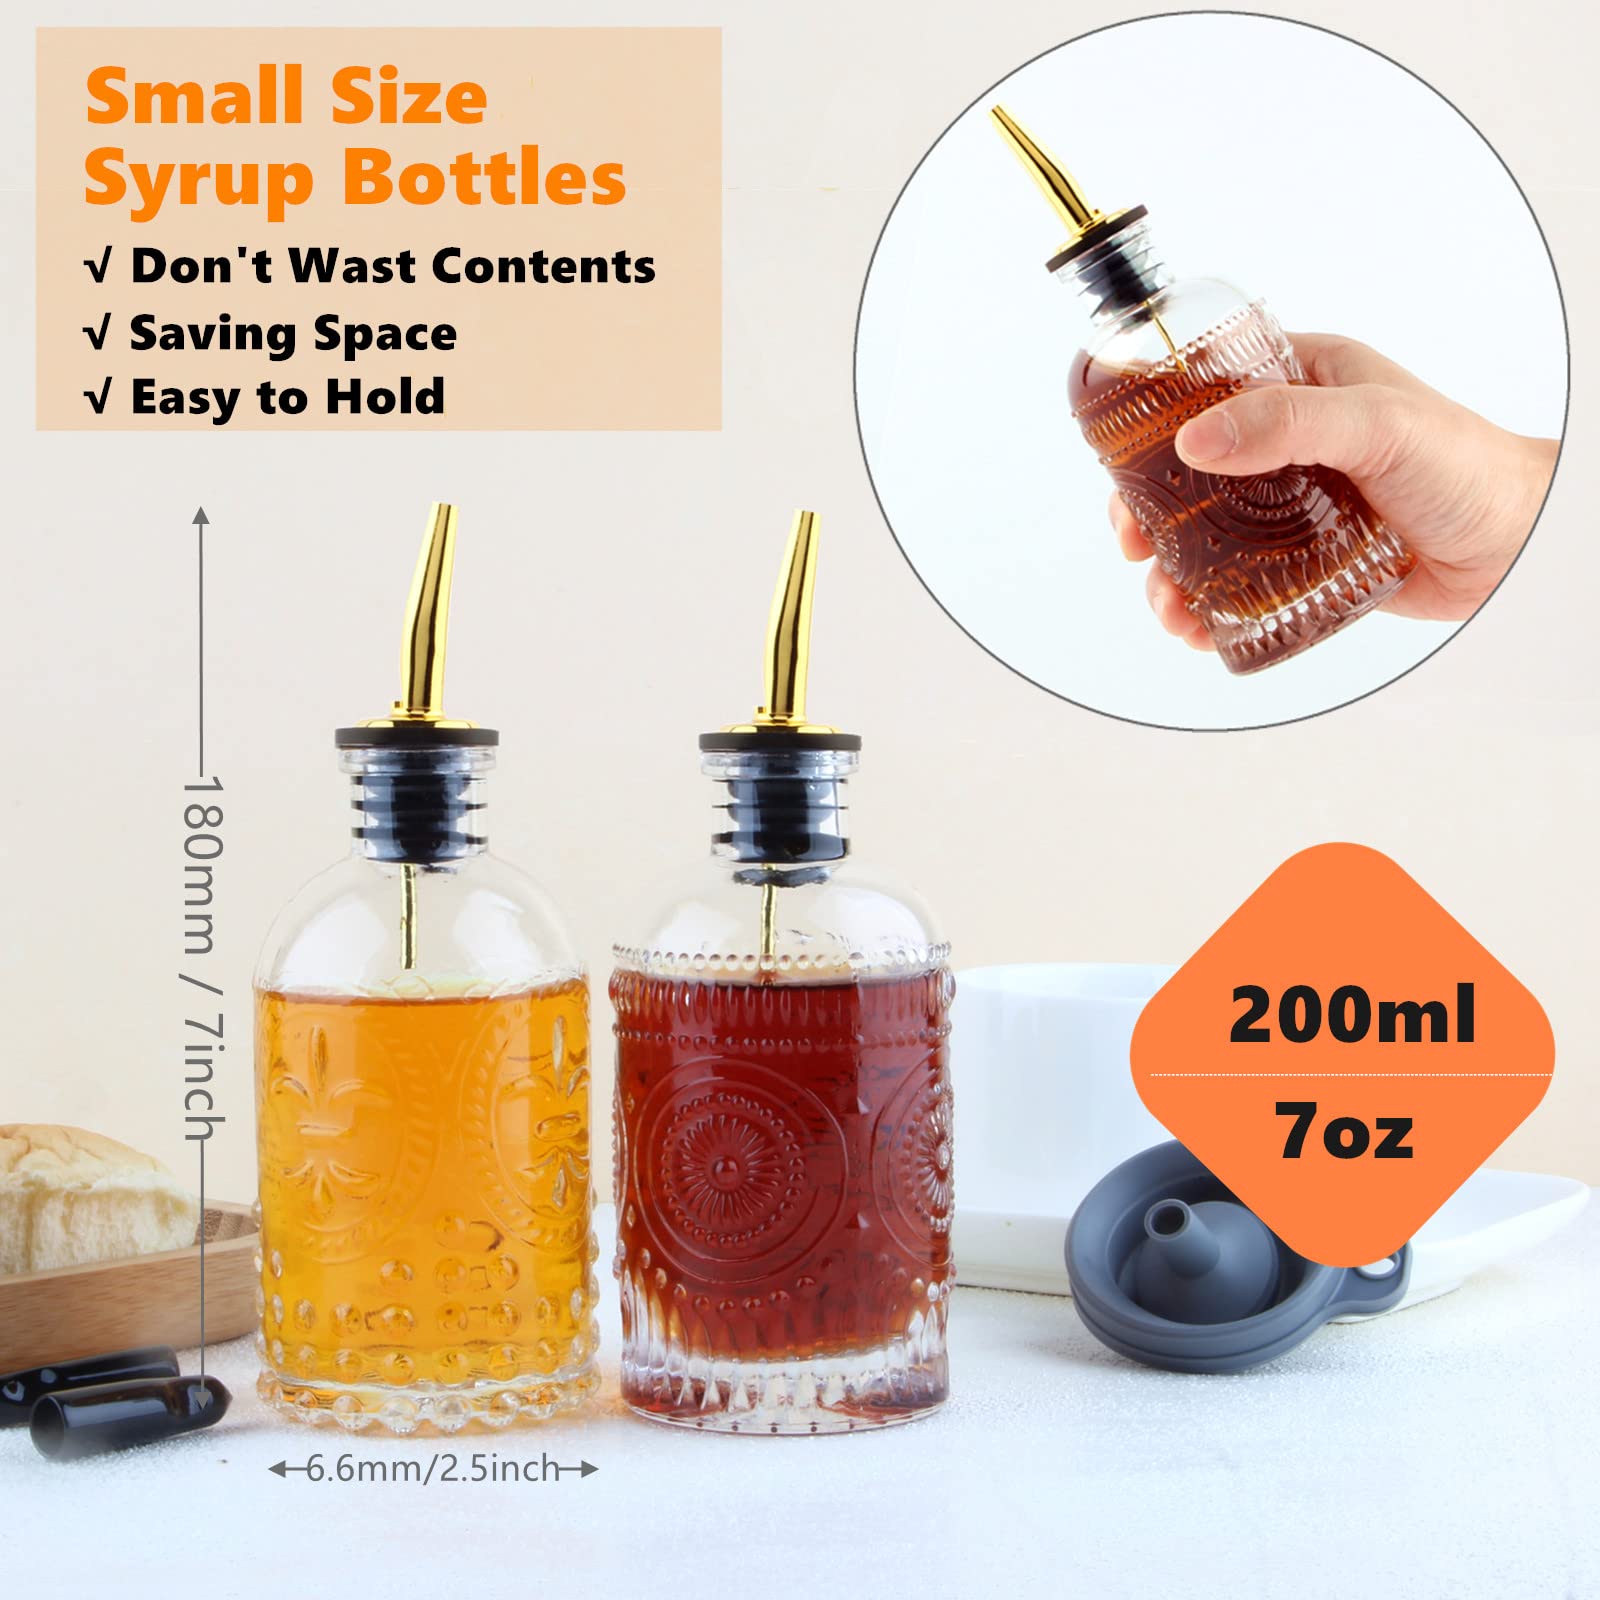 Shining Craft Coffee Syrup Dispenser Bottles Set 2 Pack 7 OZ Simple Small Syrup Bottles Set with Metal Pour Spout Ideal for Coffee Syrups, Condiments, Coffee bar, SC056 (2 pack)